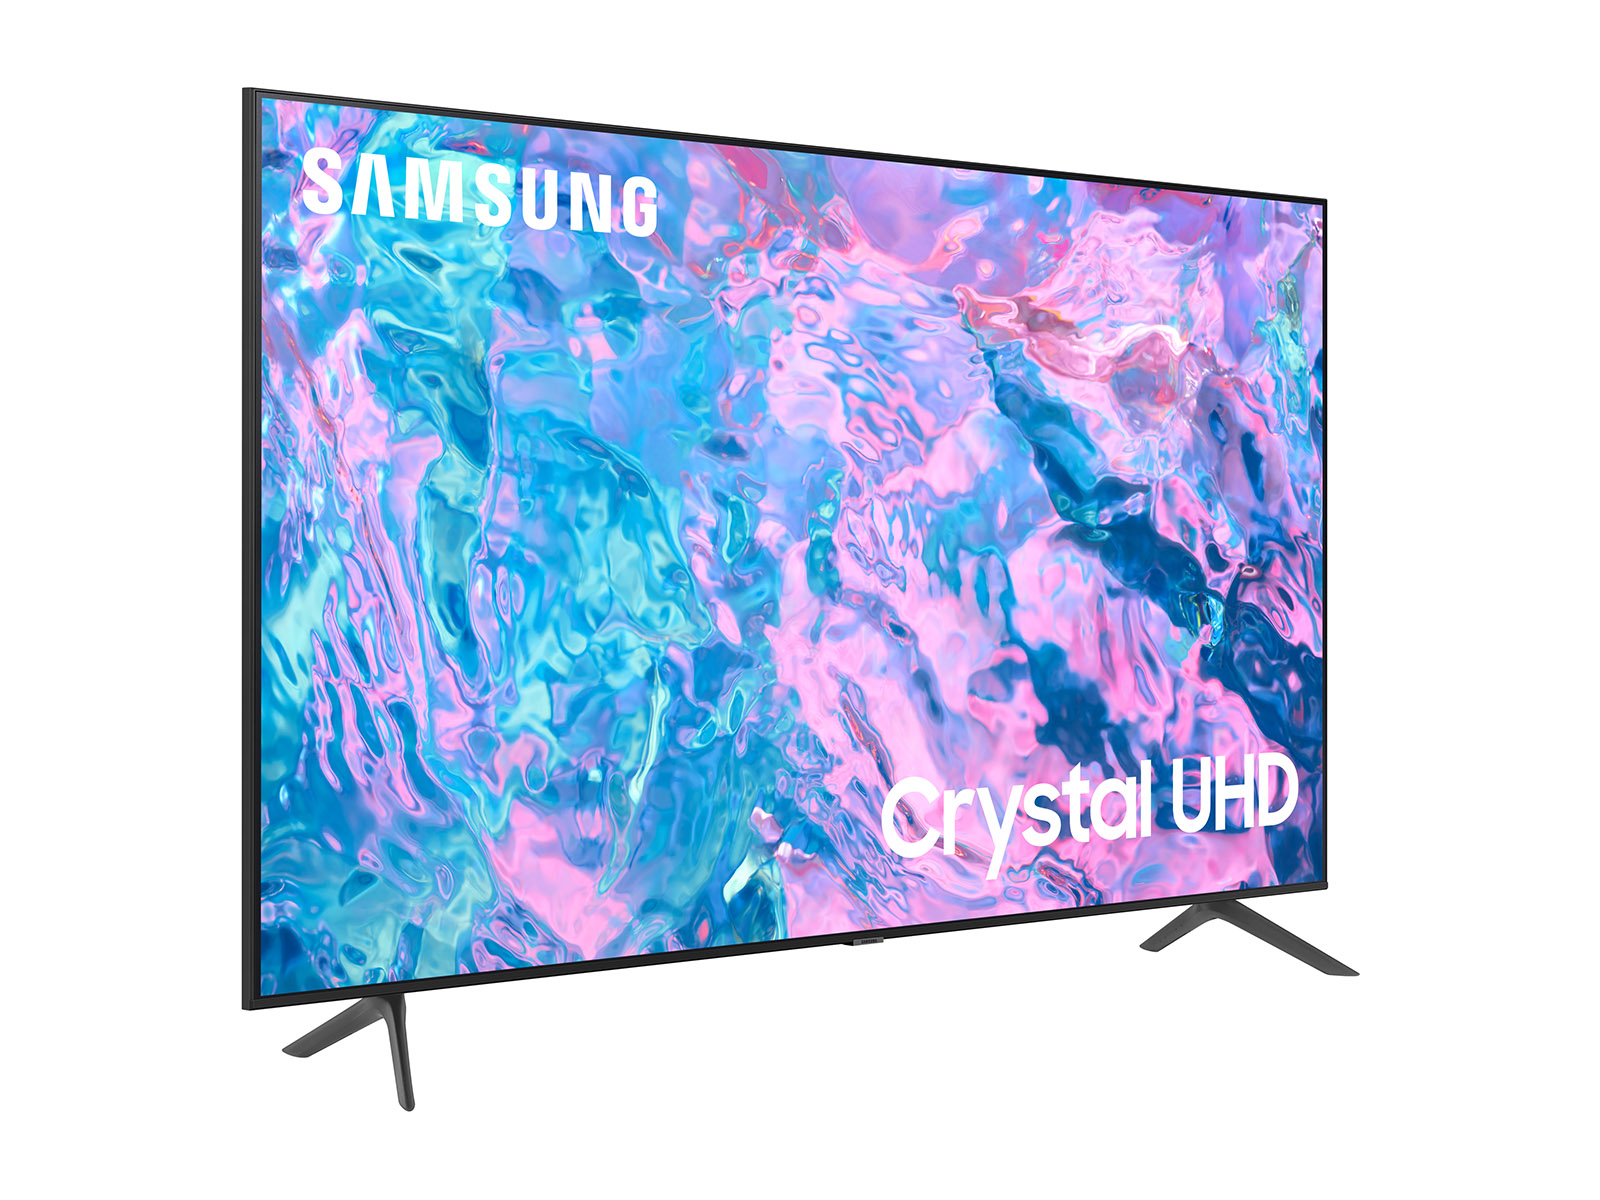 You can get a 4K TV for free, with a very creative new catch